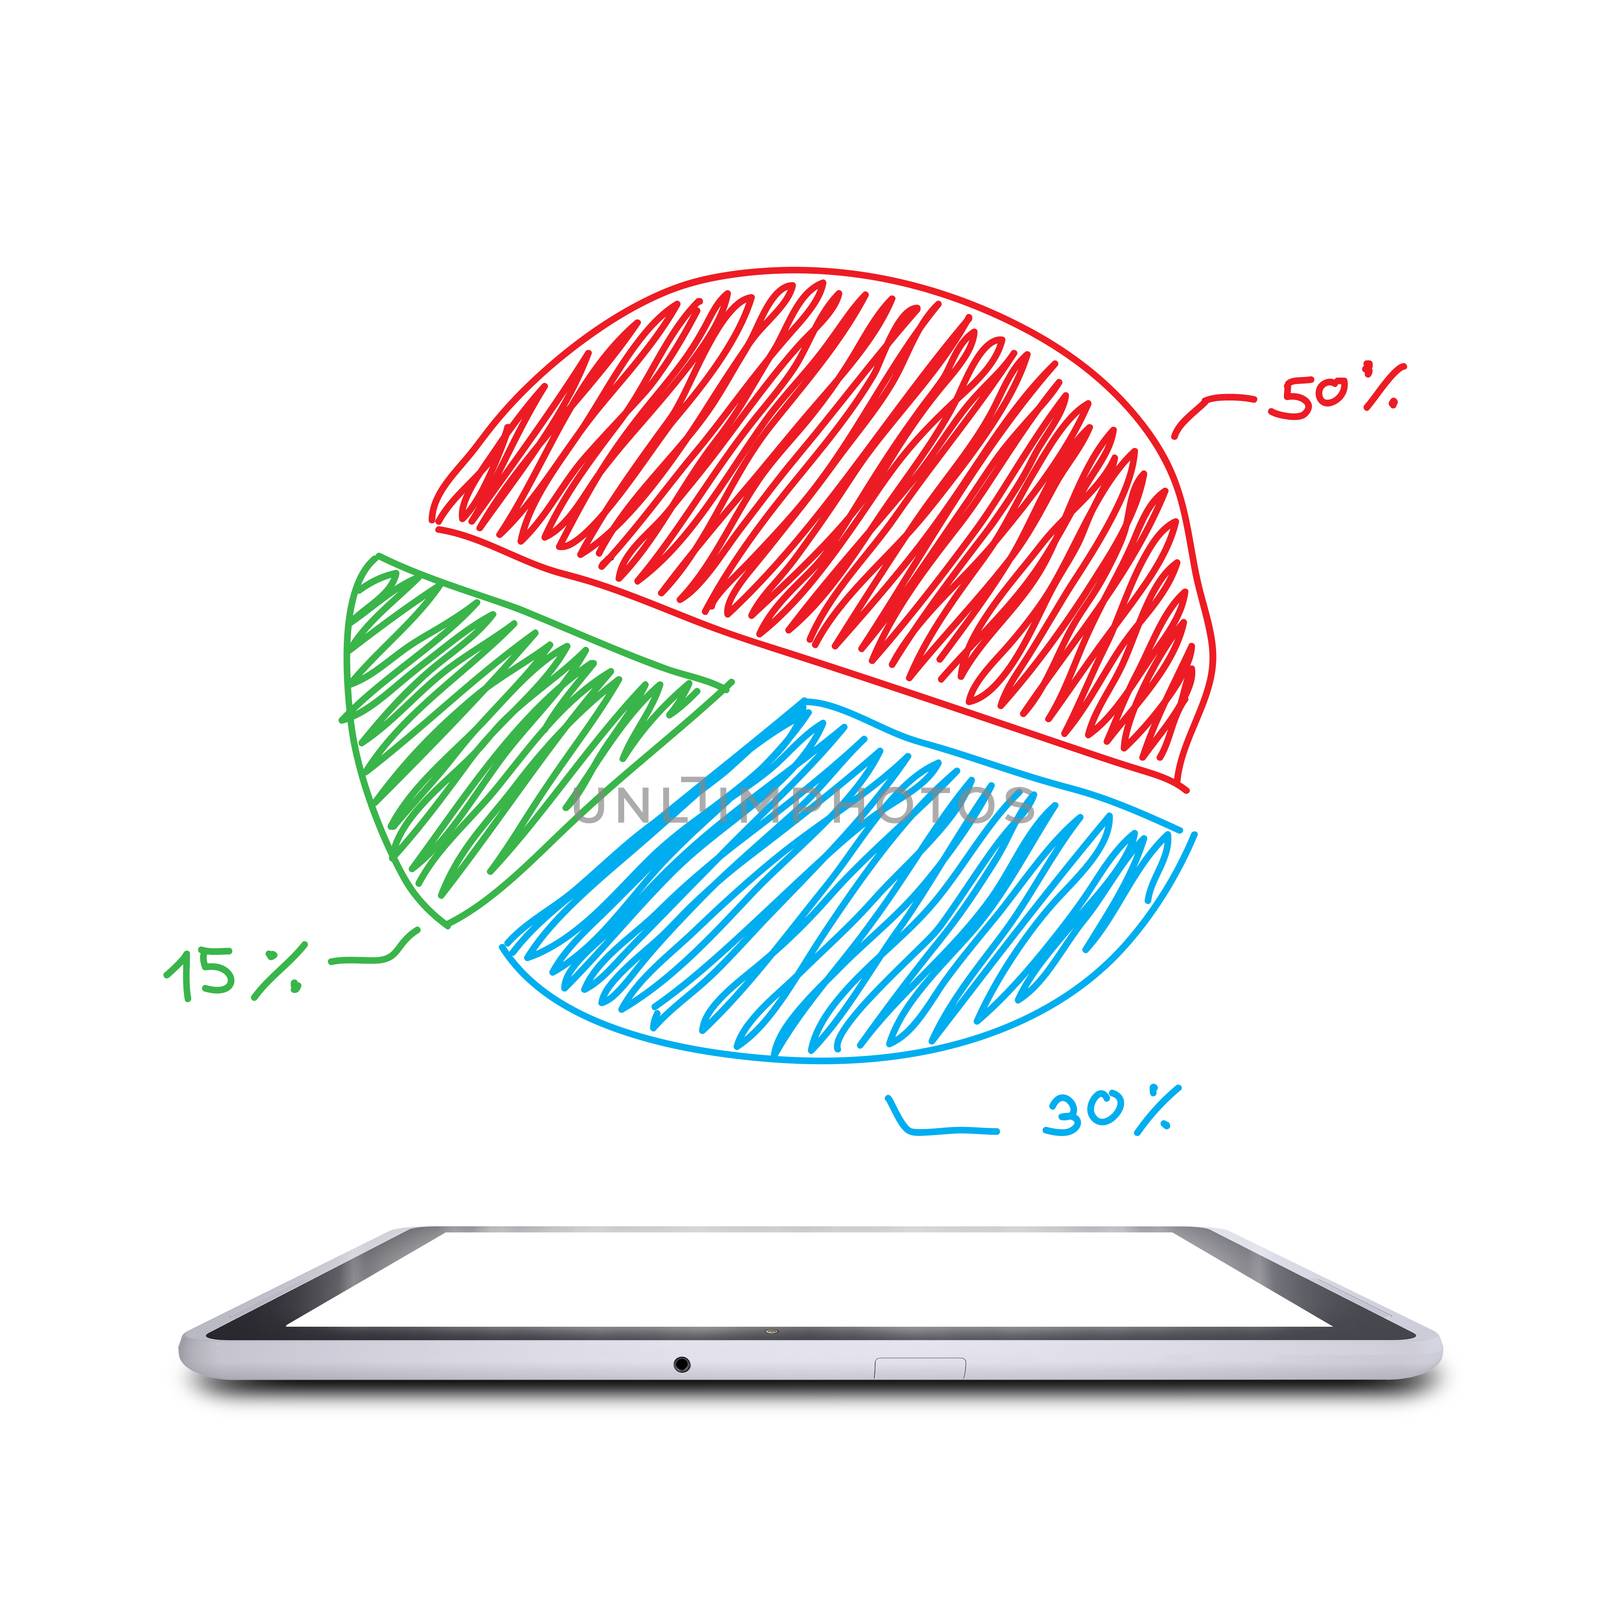 On the screen of the tablet is a pie chart. Concept of success